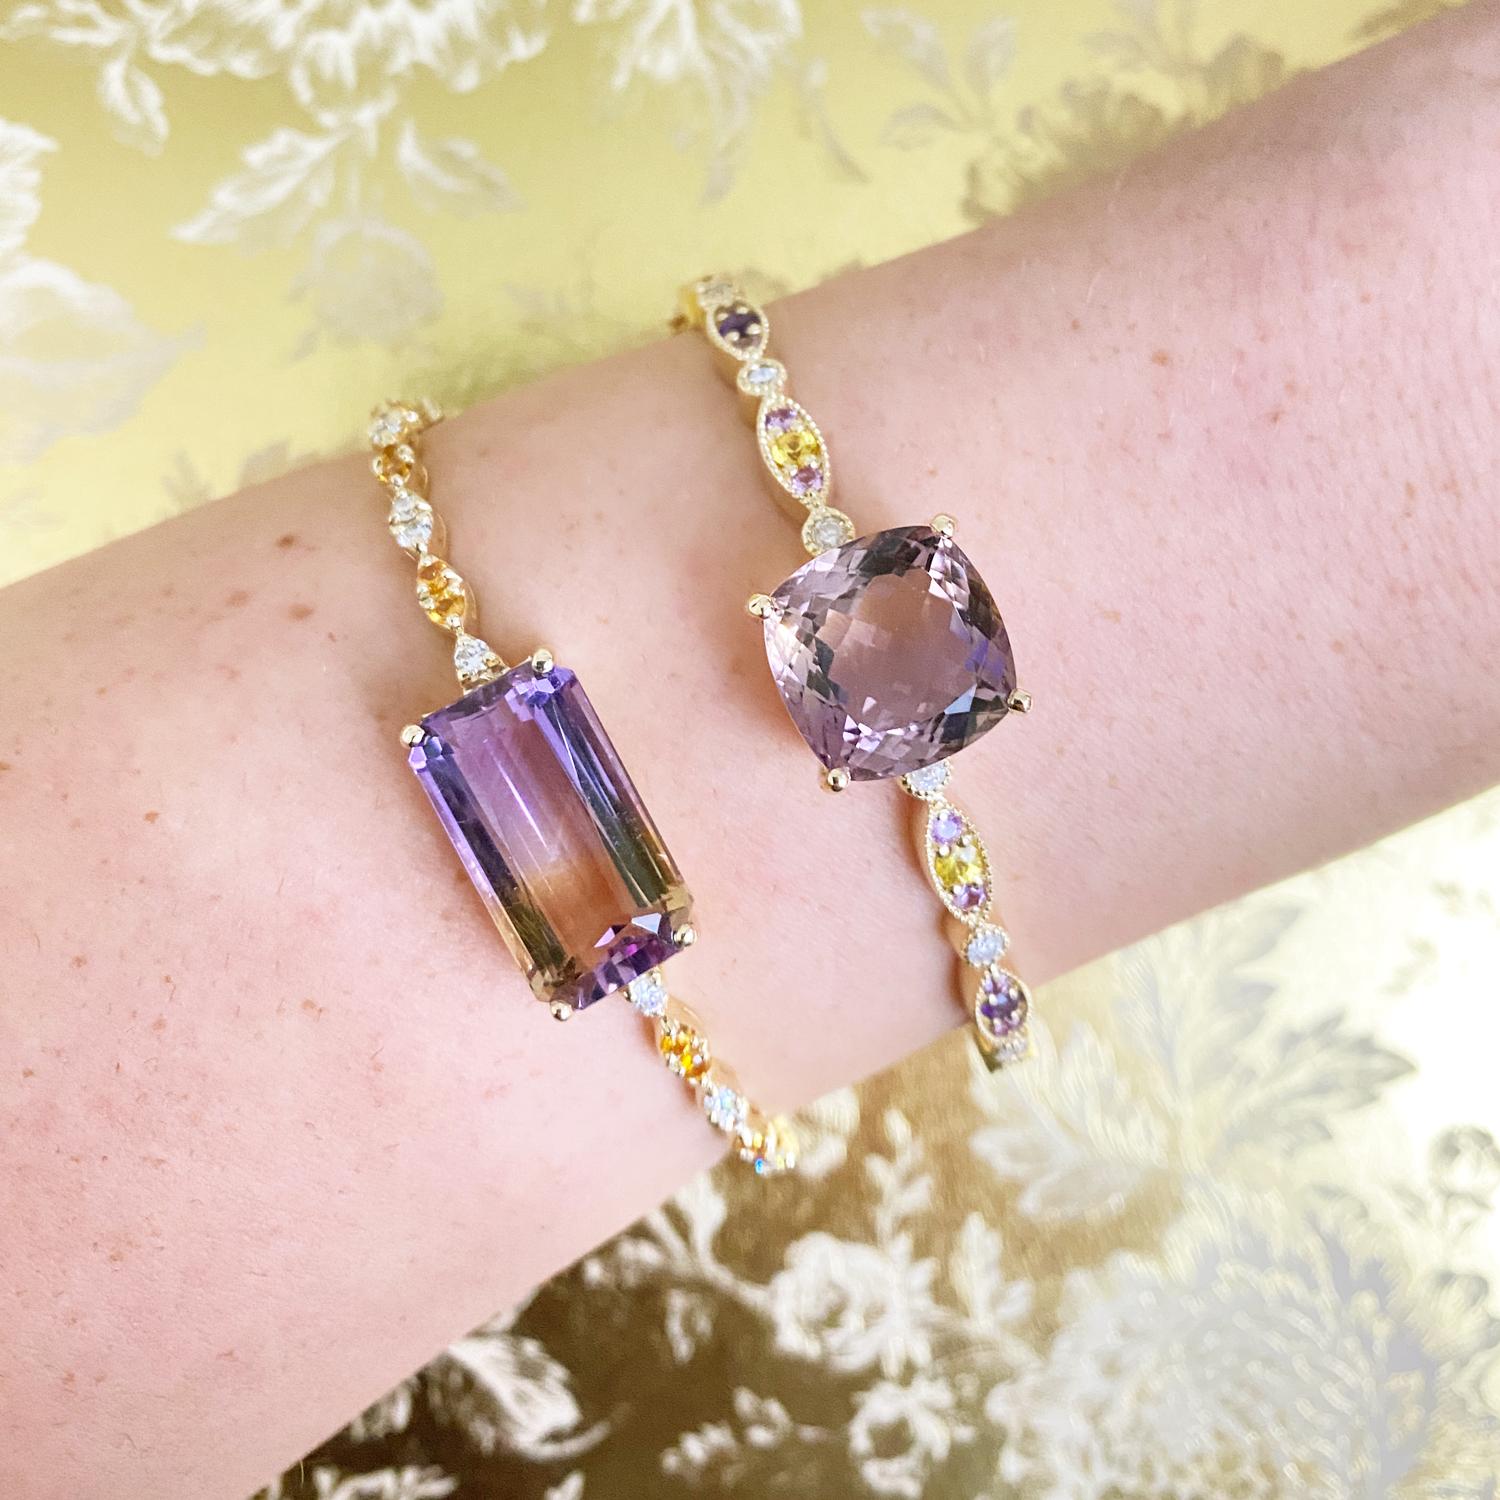 14K Yellow Gold

Center Stone: 12.68 Carats Total Weight of an Emerald Cut Ametrine

0.45 Carats Total Weight of Round Yellow Sapphires 

0.45 Carats Total Weight of Round Brilliant White Diamonds

Color: H-I / Clarity: SI 

Fine one-of-a-kind